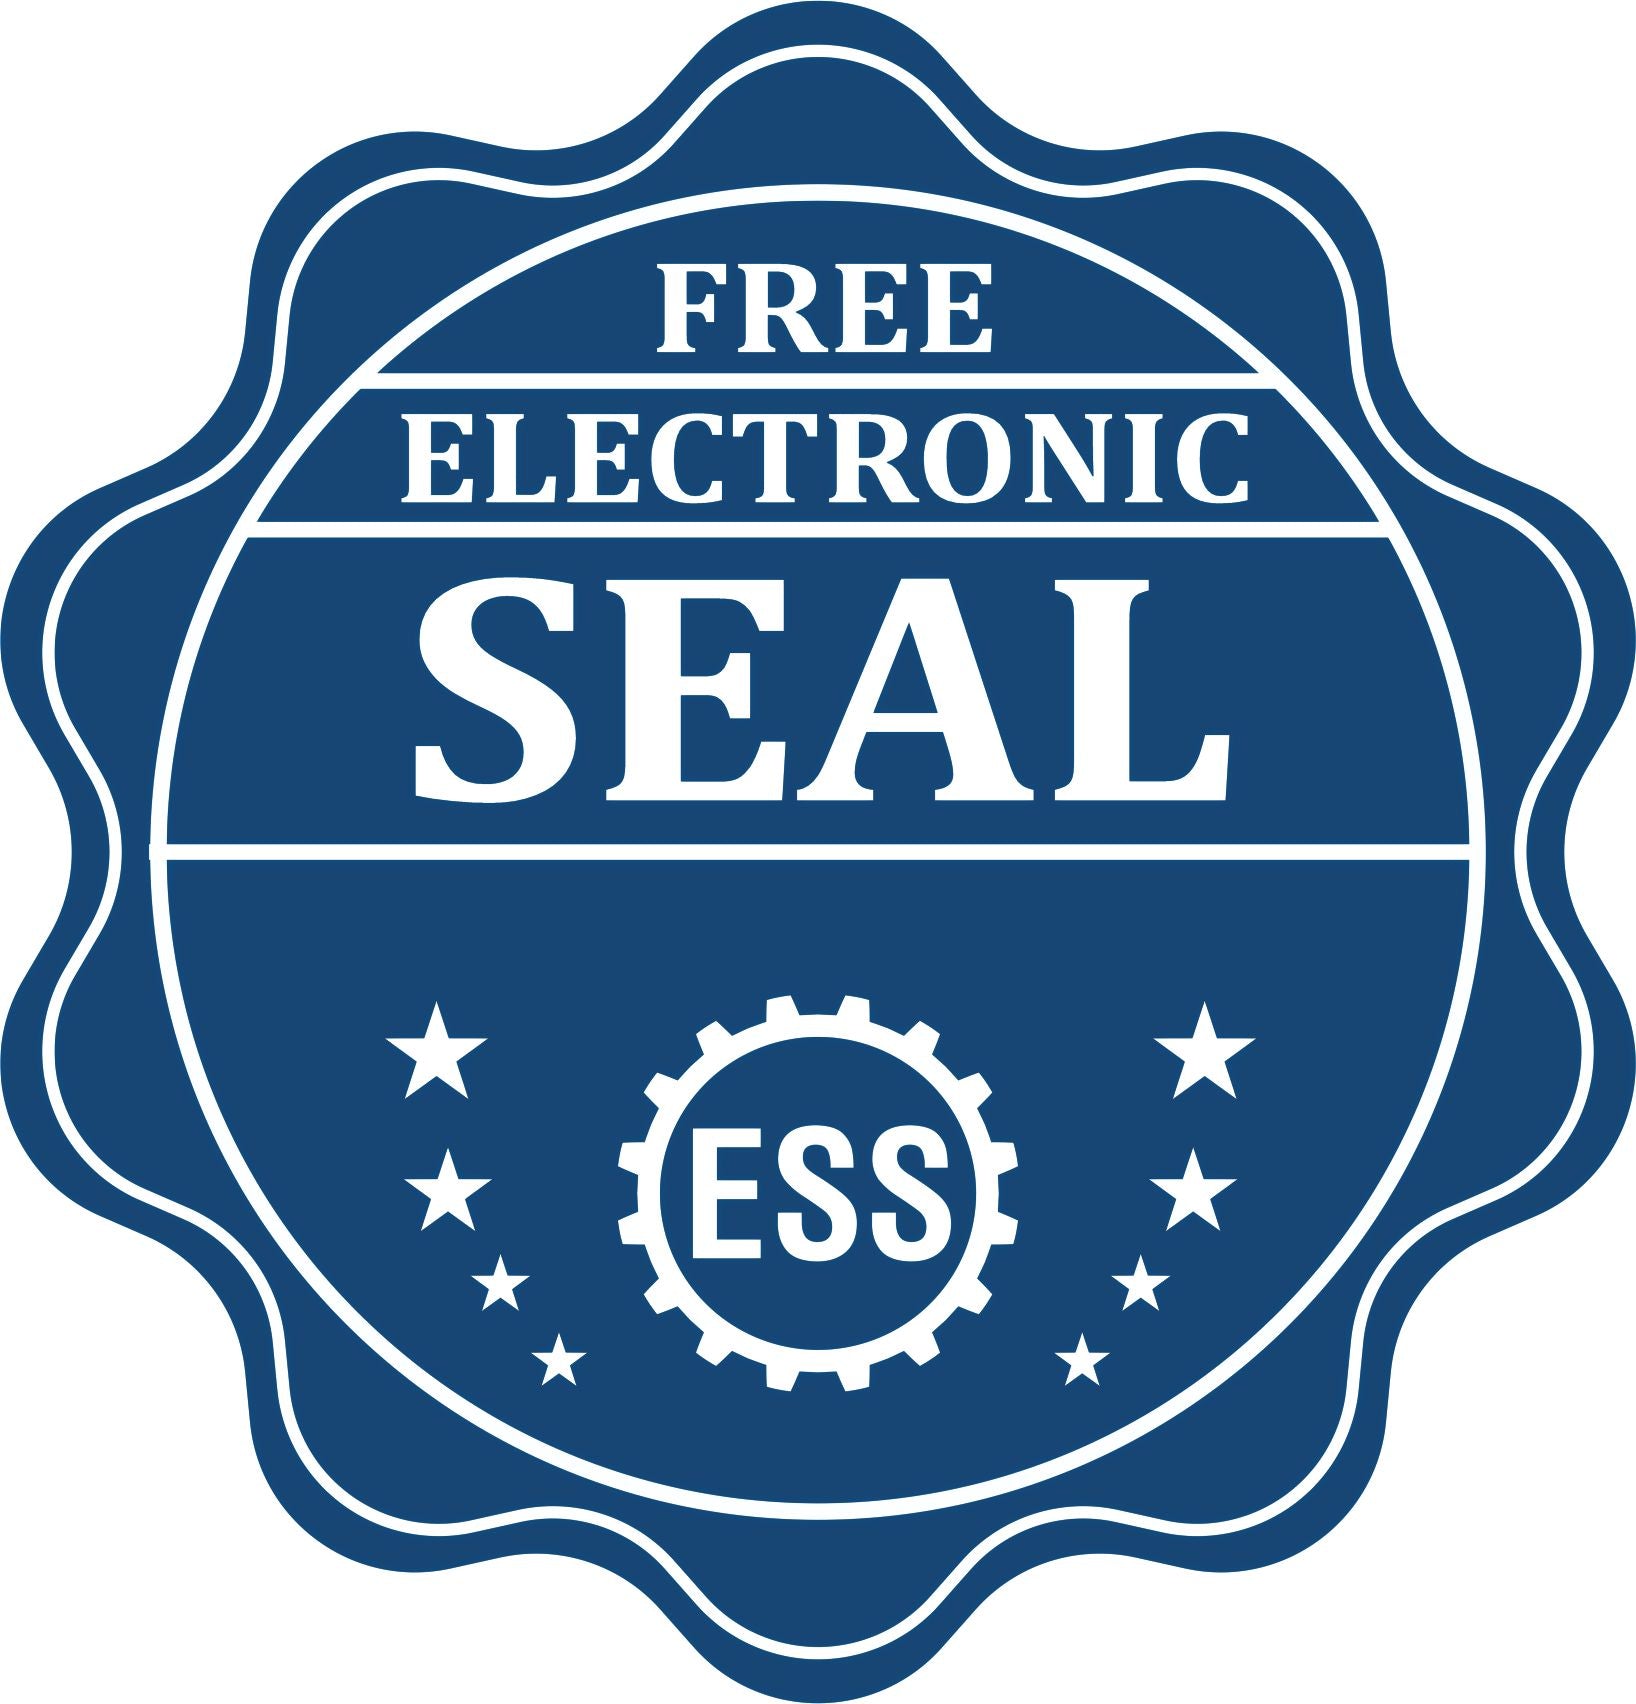 A badge showing a free electronic seal for the Heavy-Duty California Rectangular Notary Stamp with stars and the ESS gear on the emblem.